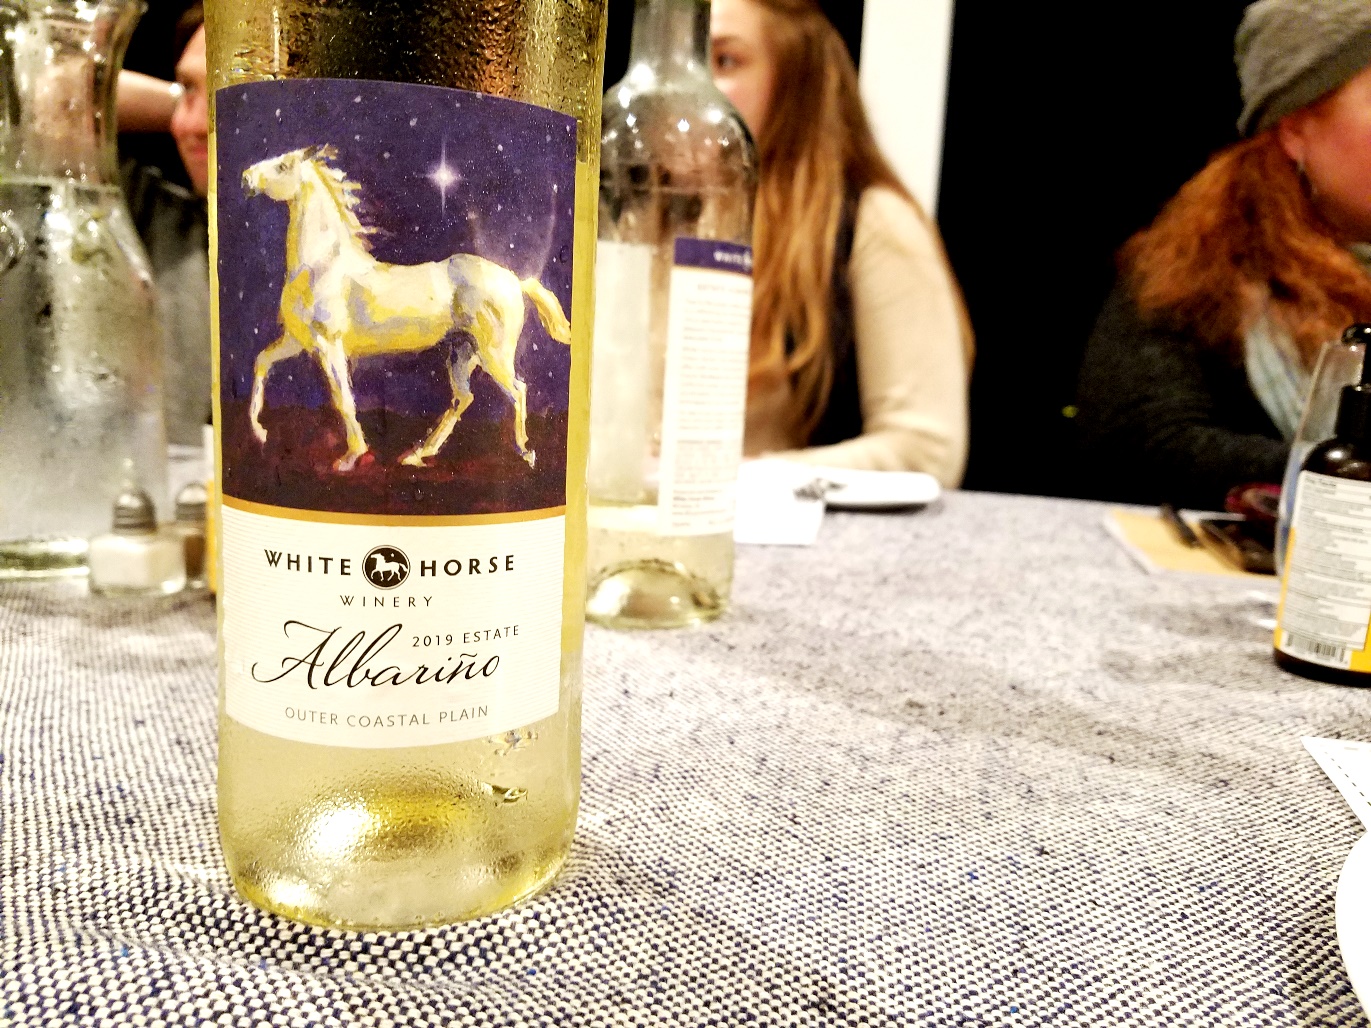 White Horse Winery, Estate Albariño 2019, Outer Coastal Plain, New Jersey, Wine Casual